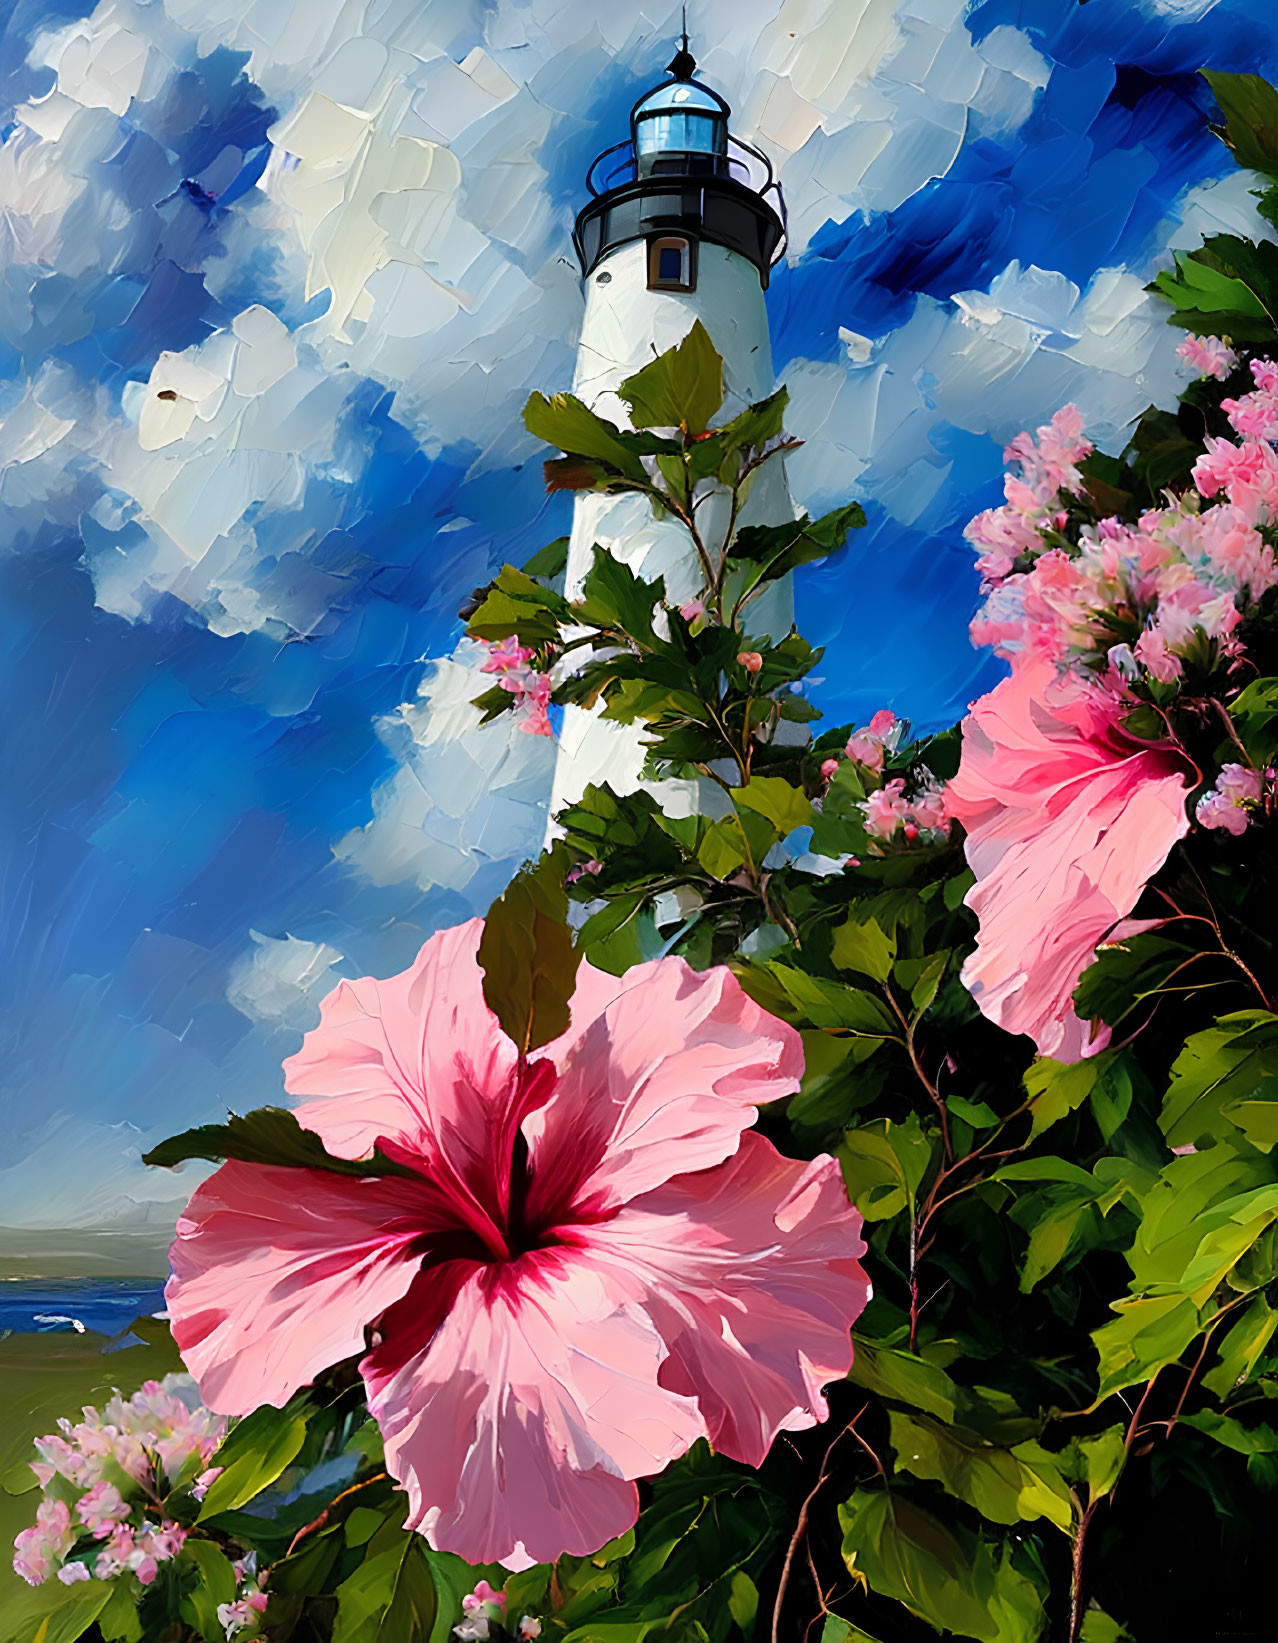 Lighthouse painting with lush greenery and hibiscus flowers